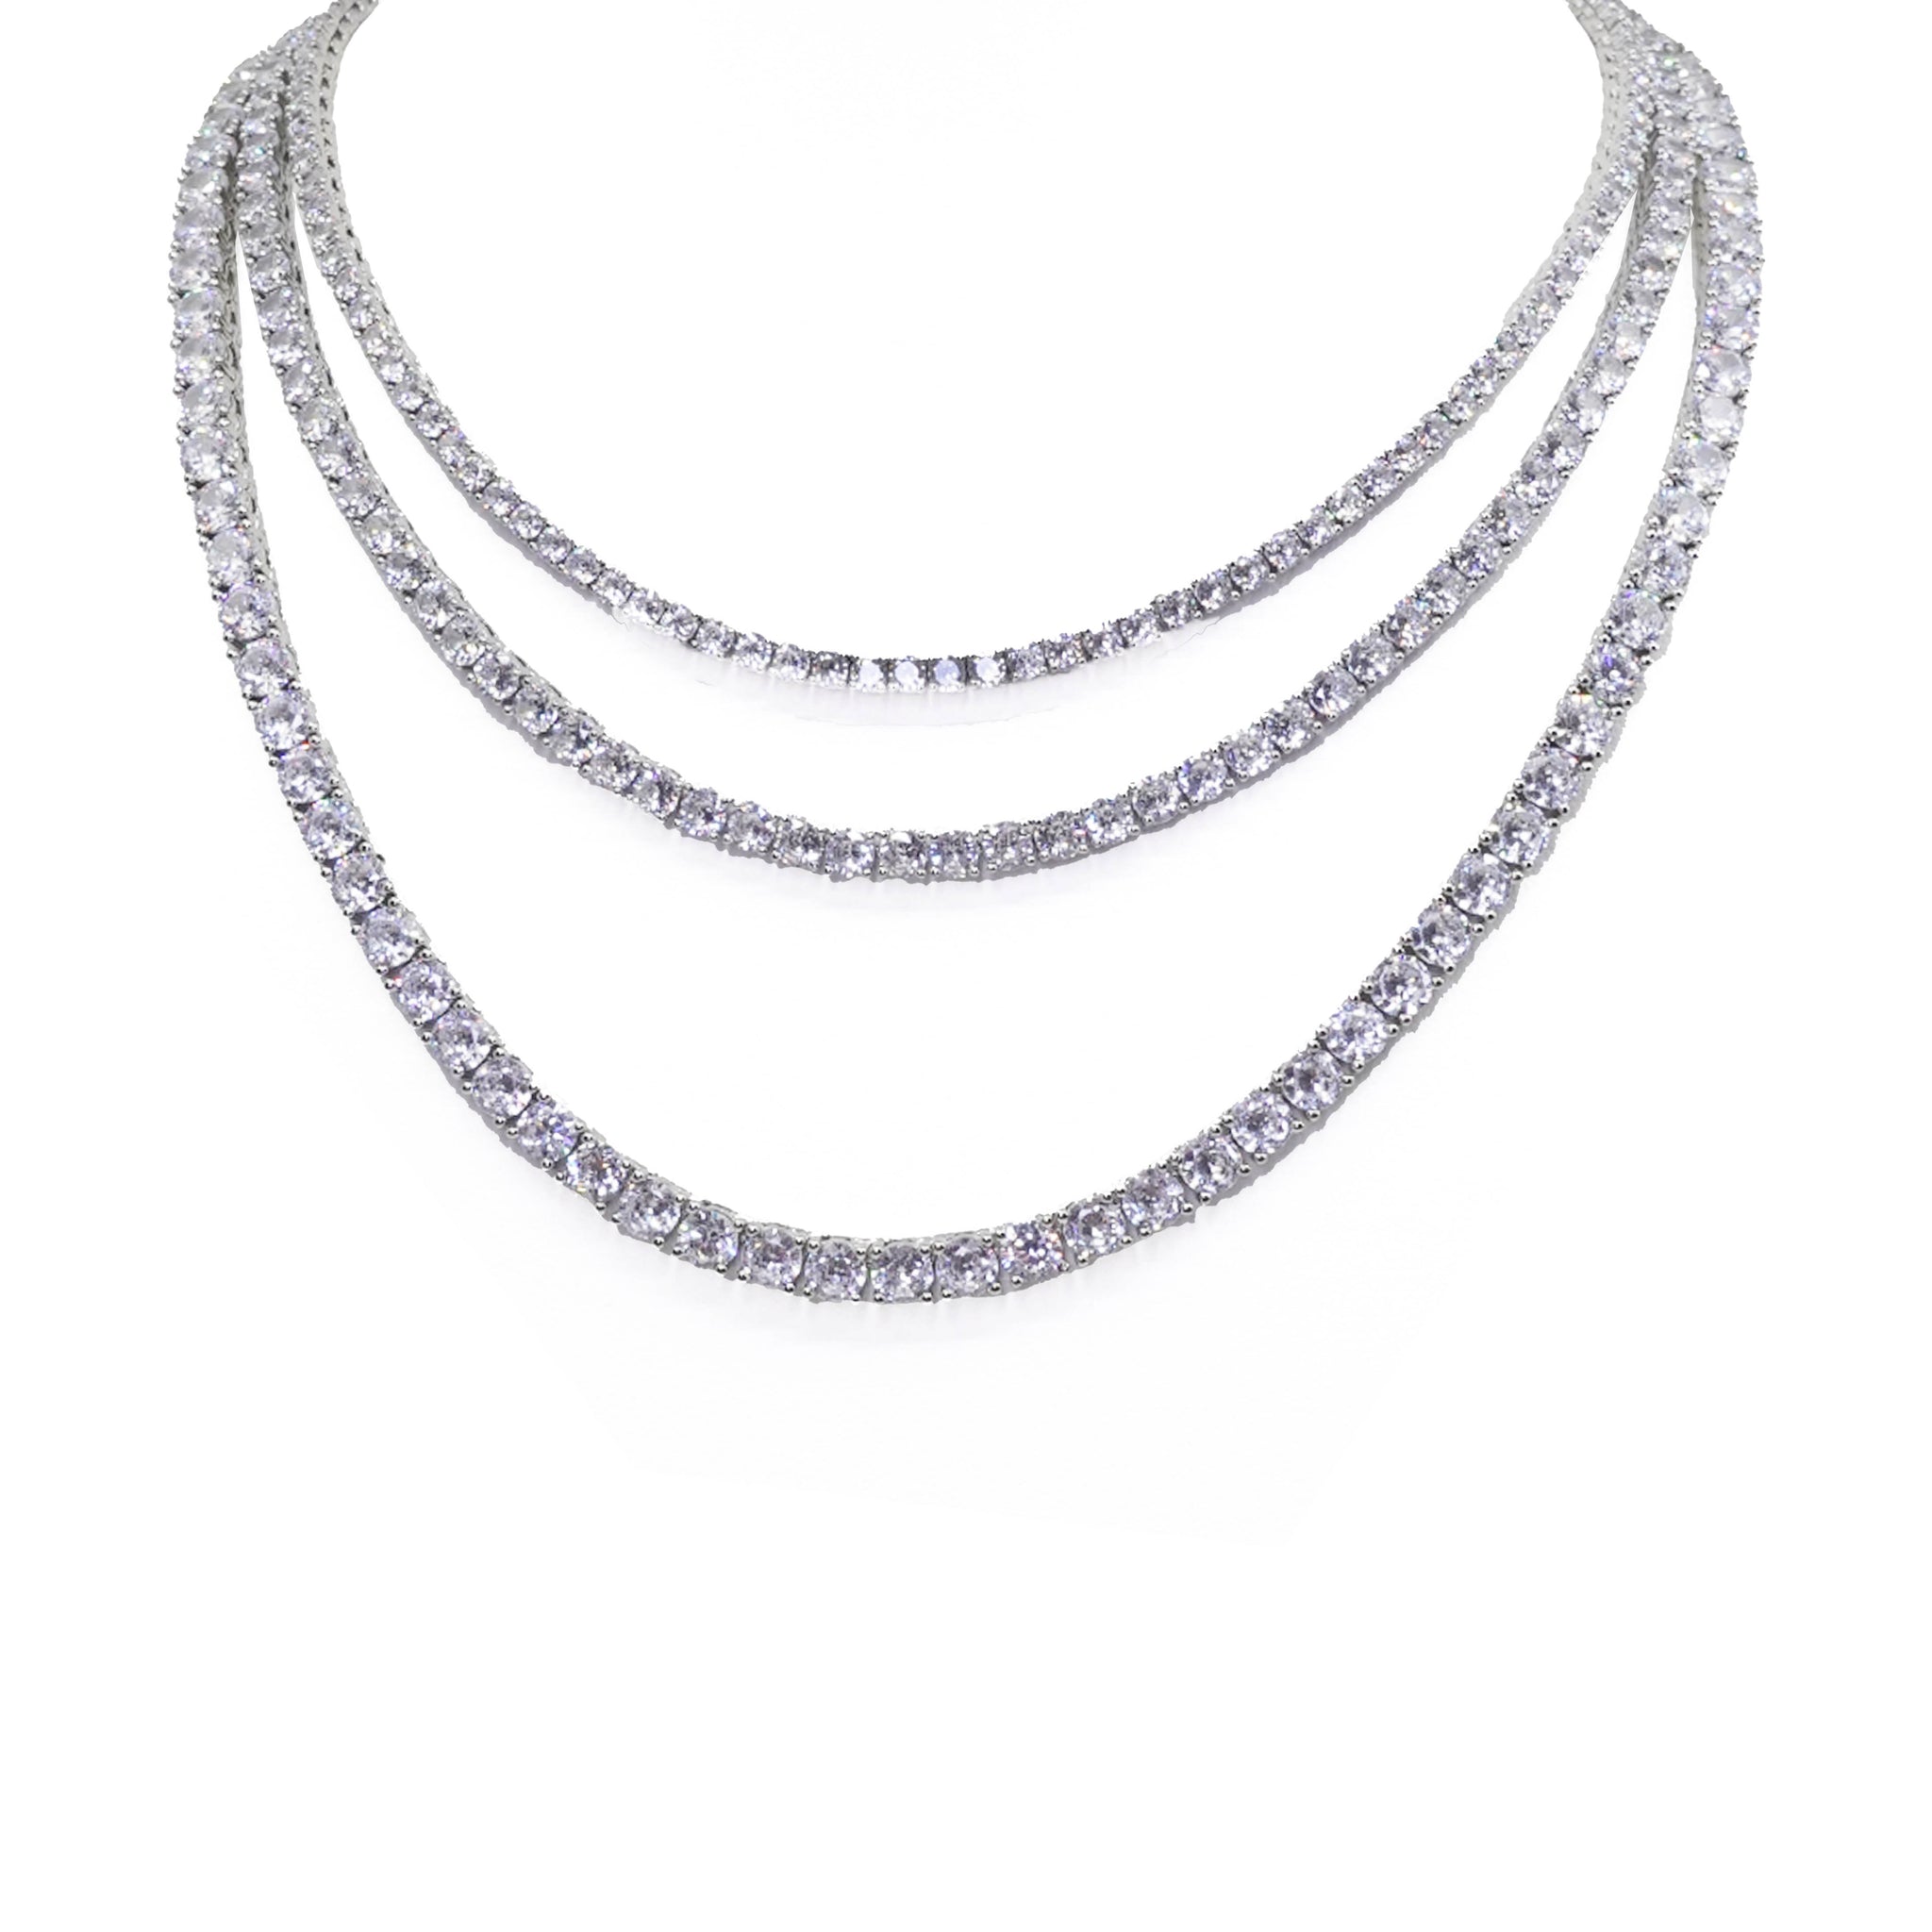 Silver Bling Tennis Necklace